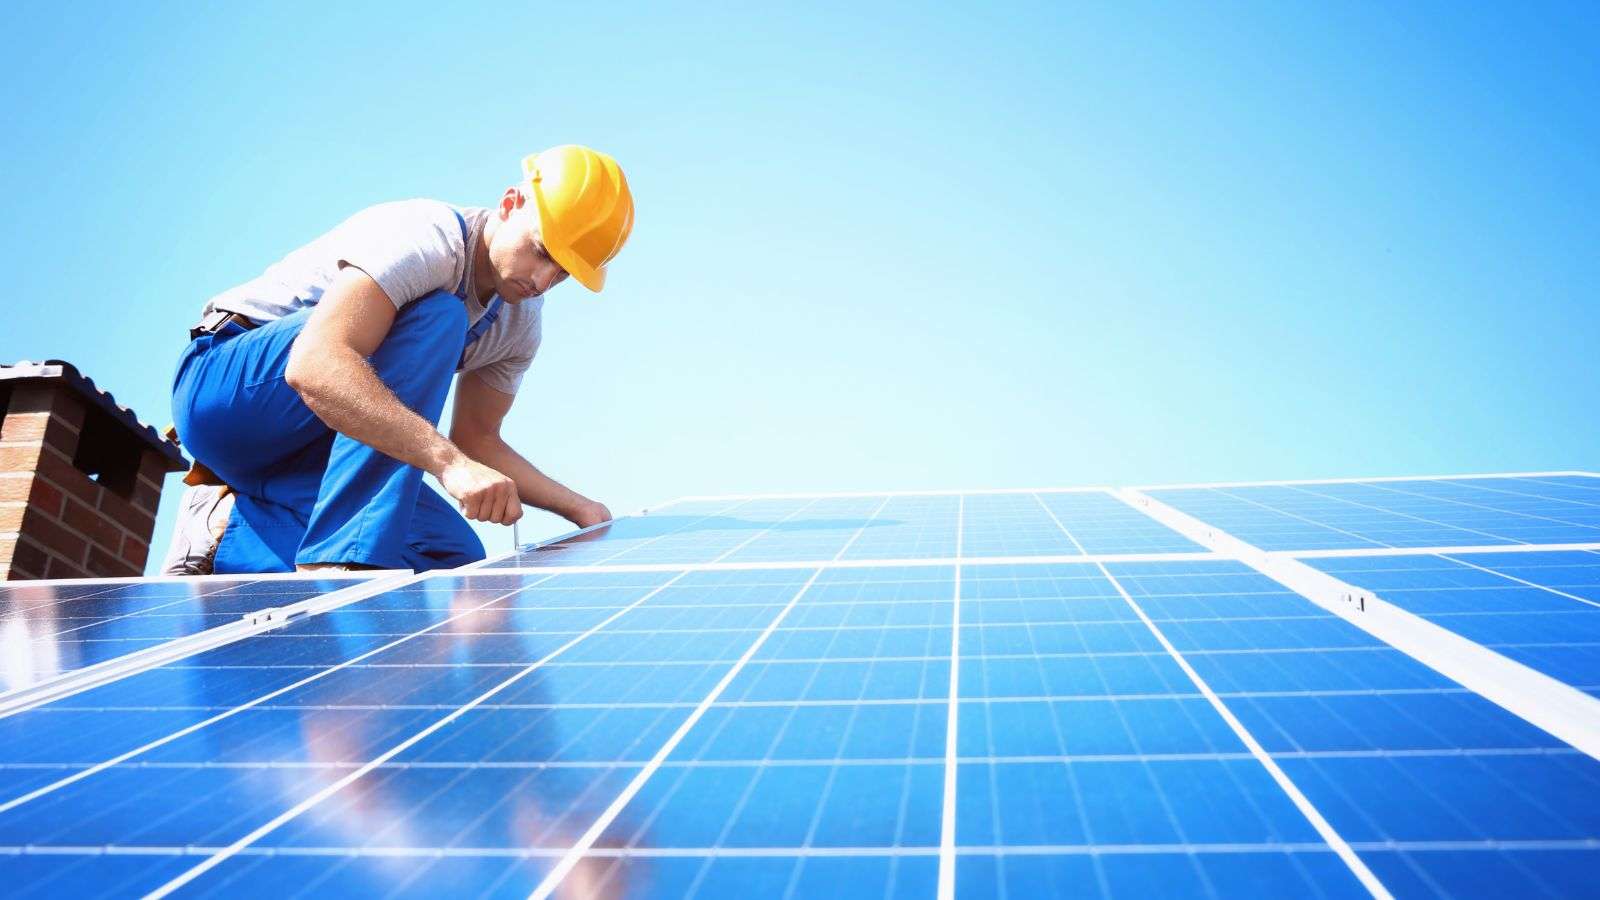 solar roofing jobs - bighomeprojects.com